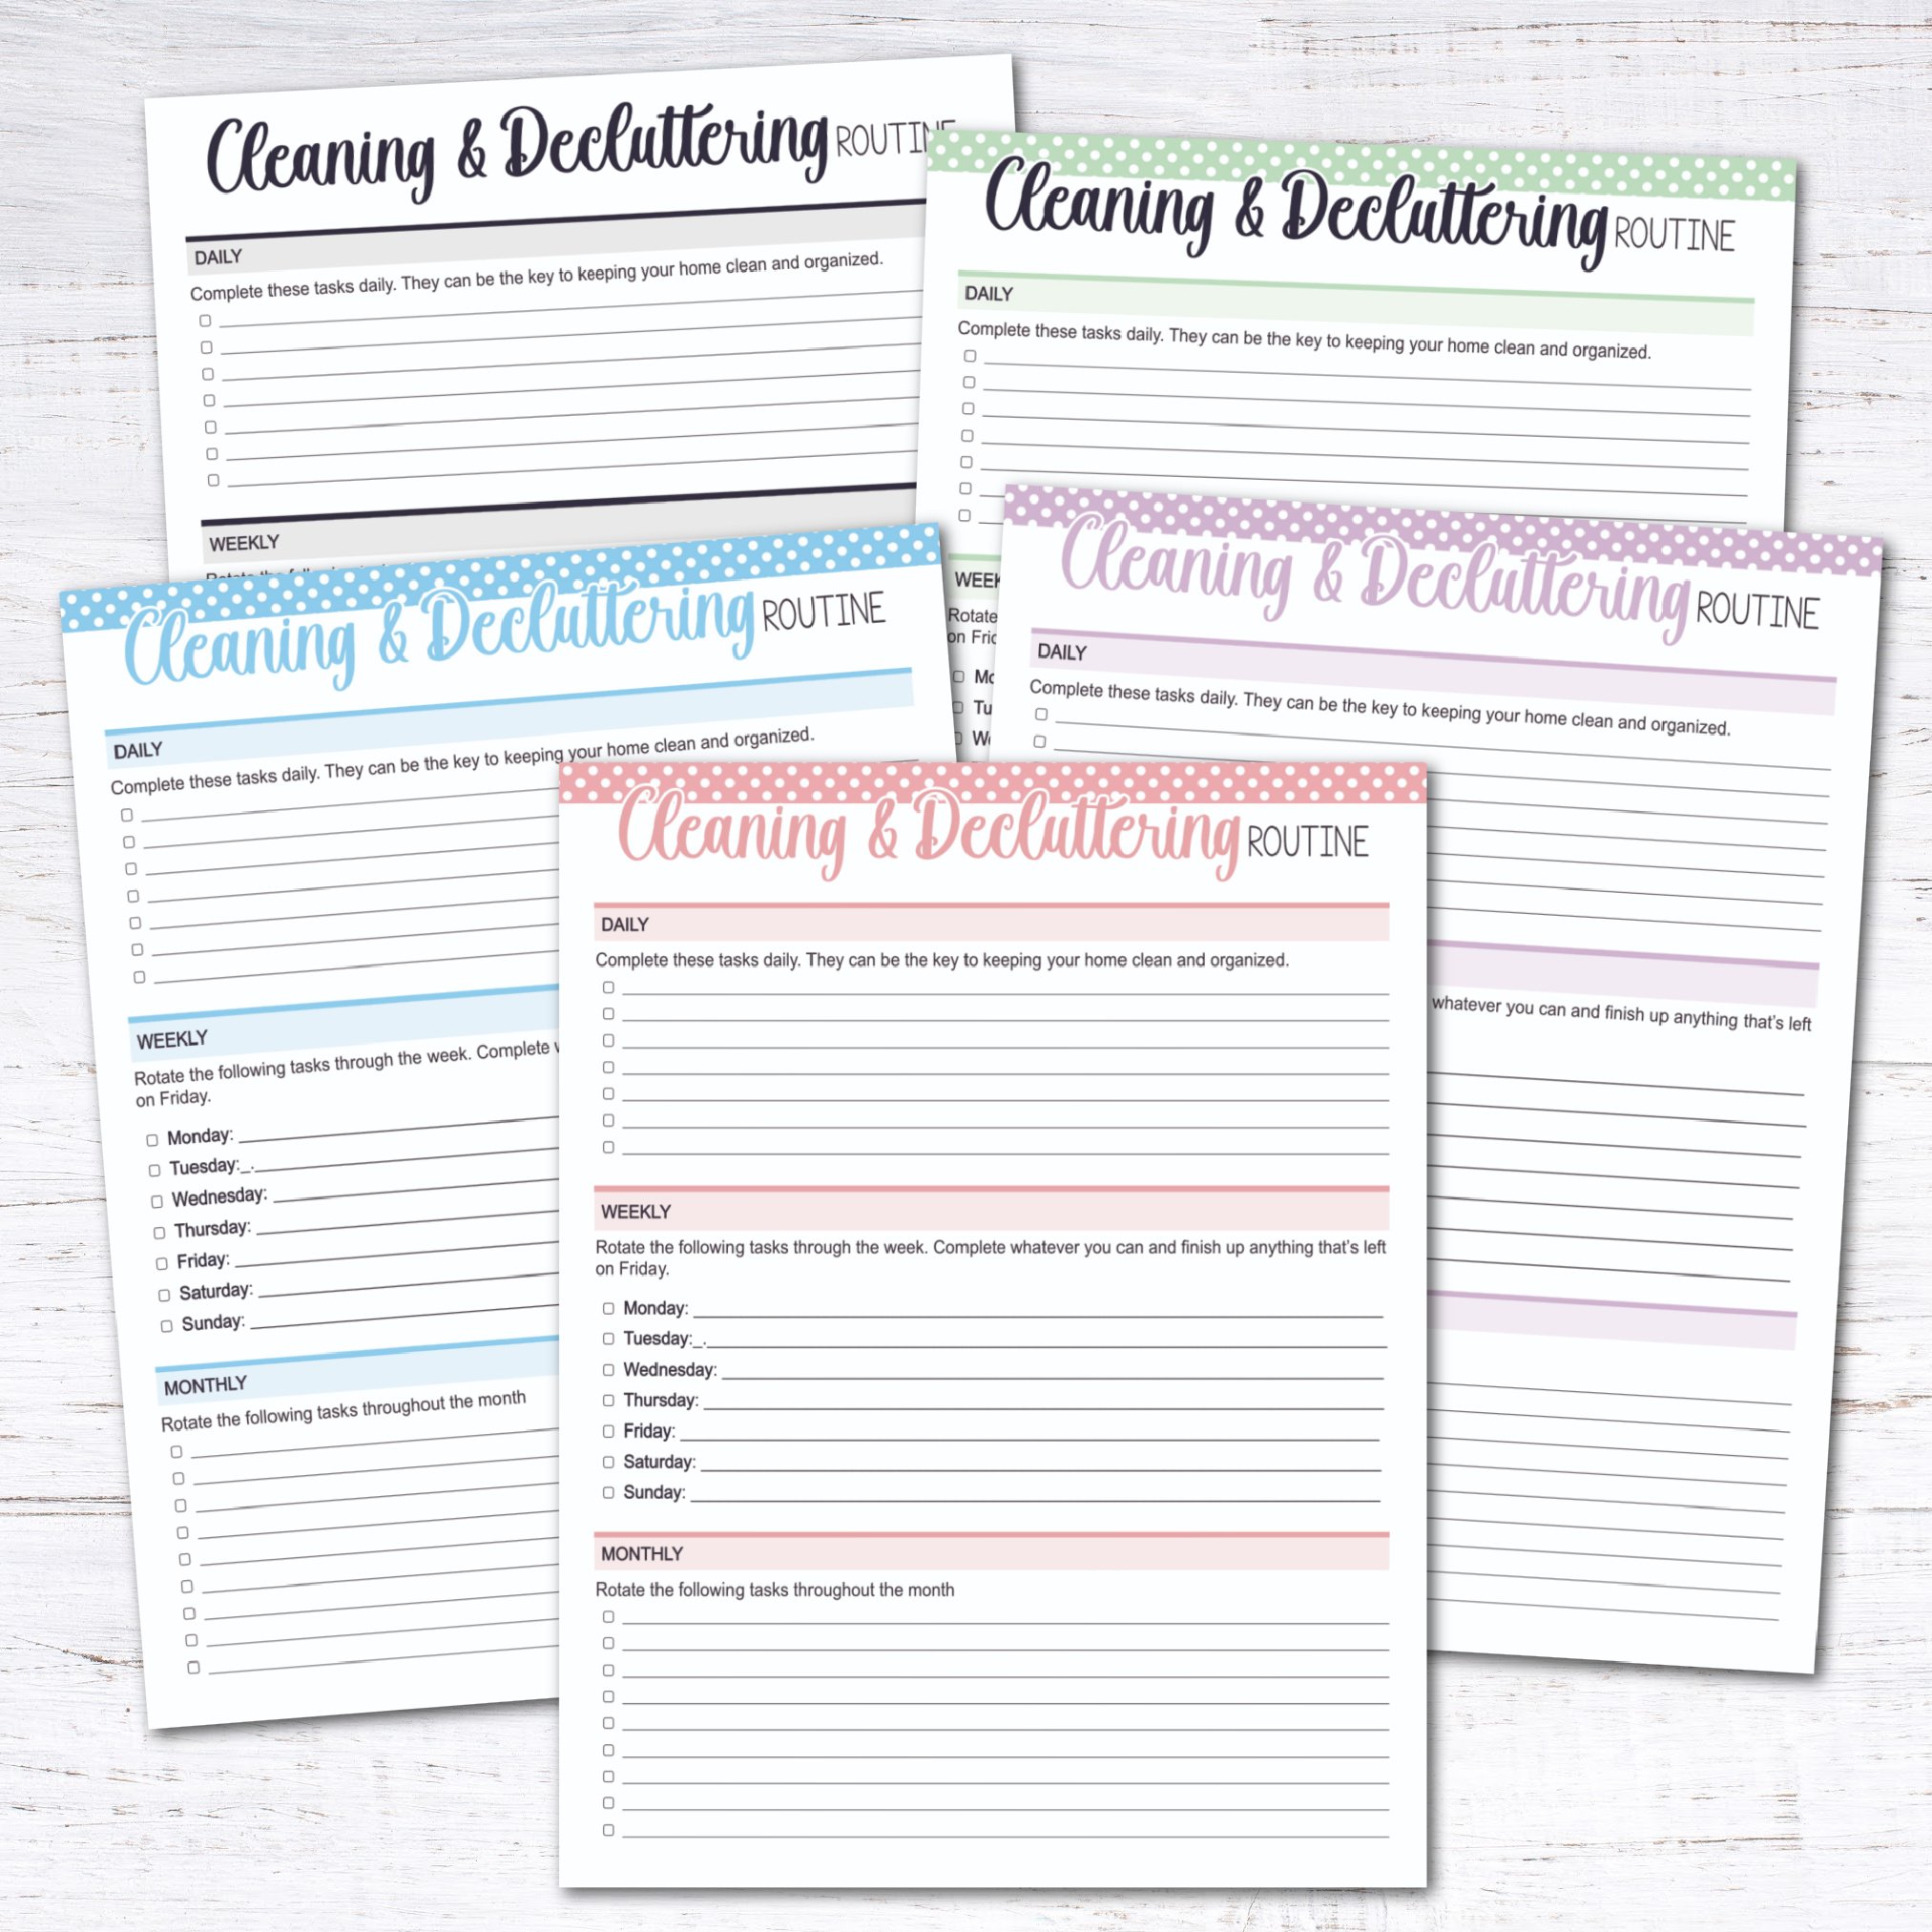 Cleaning and Decluttering Routine Worksheet  Free Printable (Day 2) .jpg